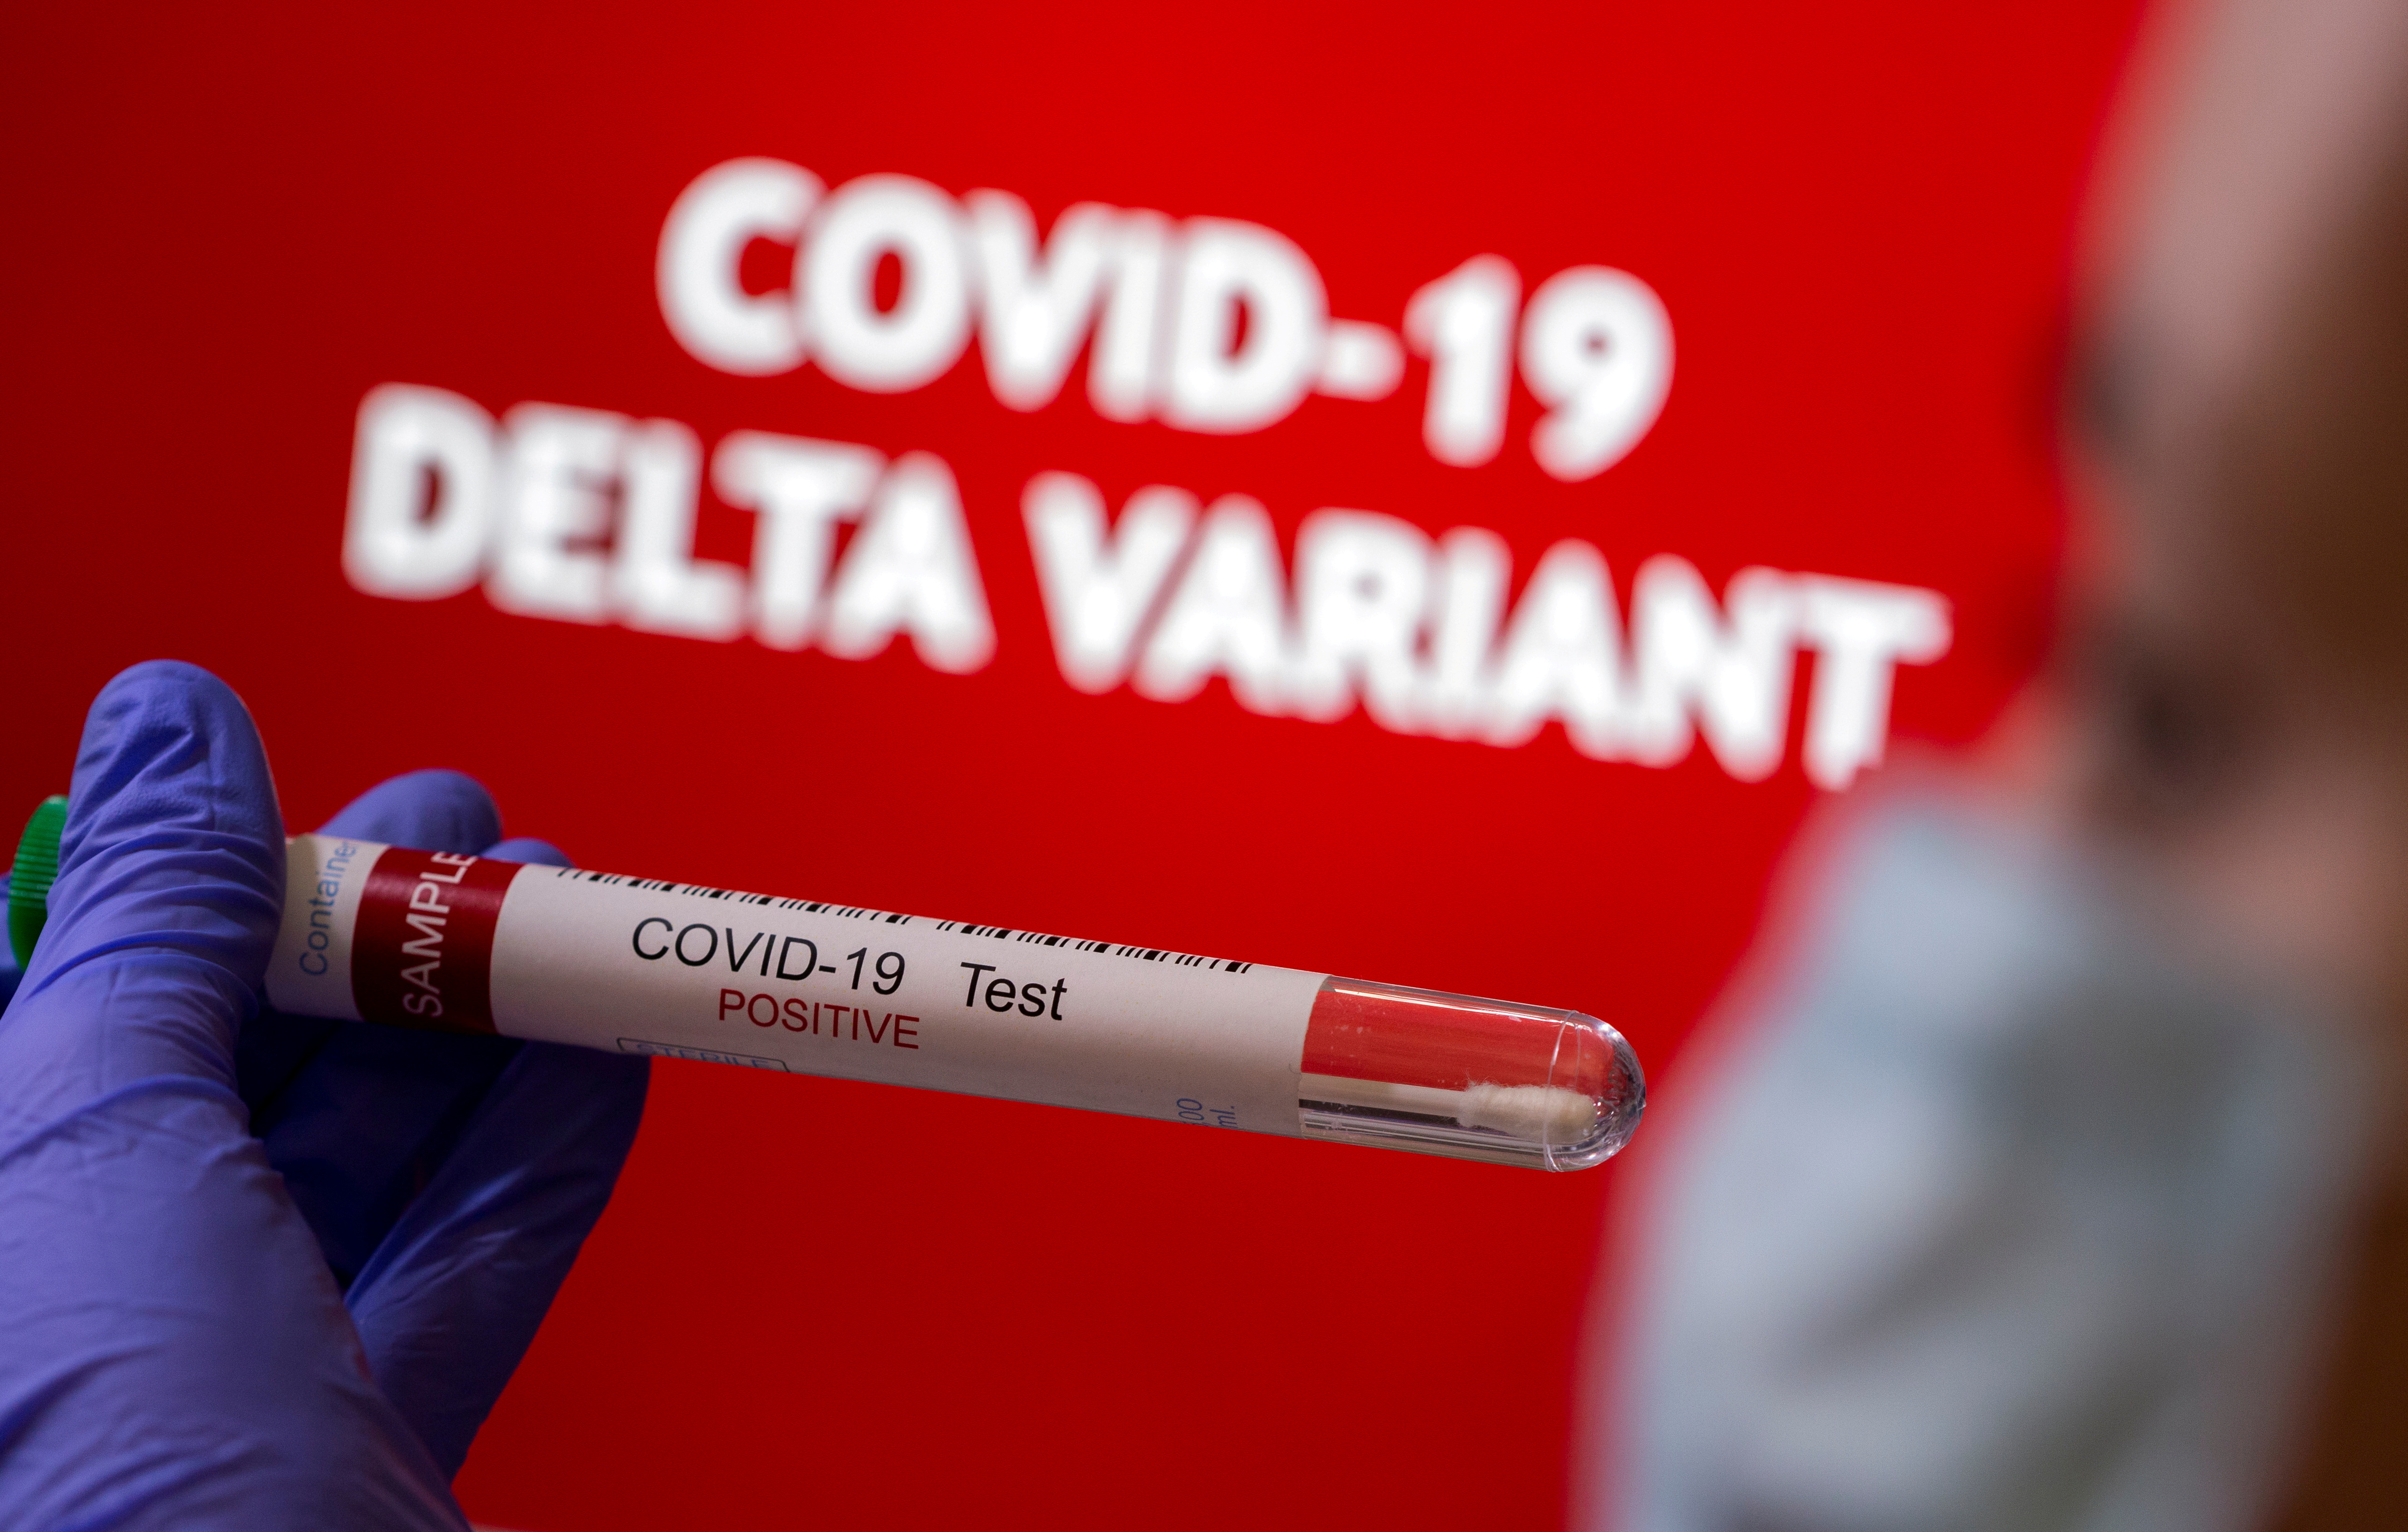 FILE PHOTO: Illustration of a test tube labelled 'COVID-19 Test Positive' in front of displayed words 'COVID-19 Delta variant'